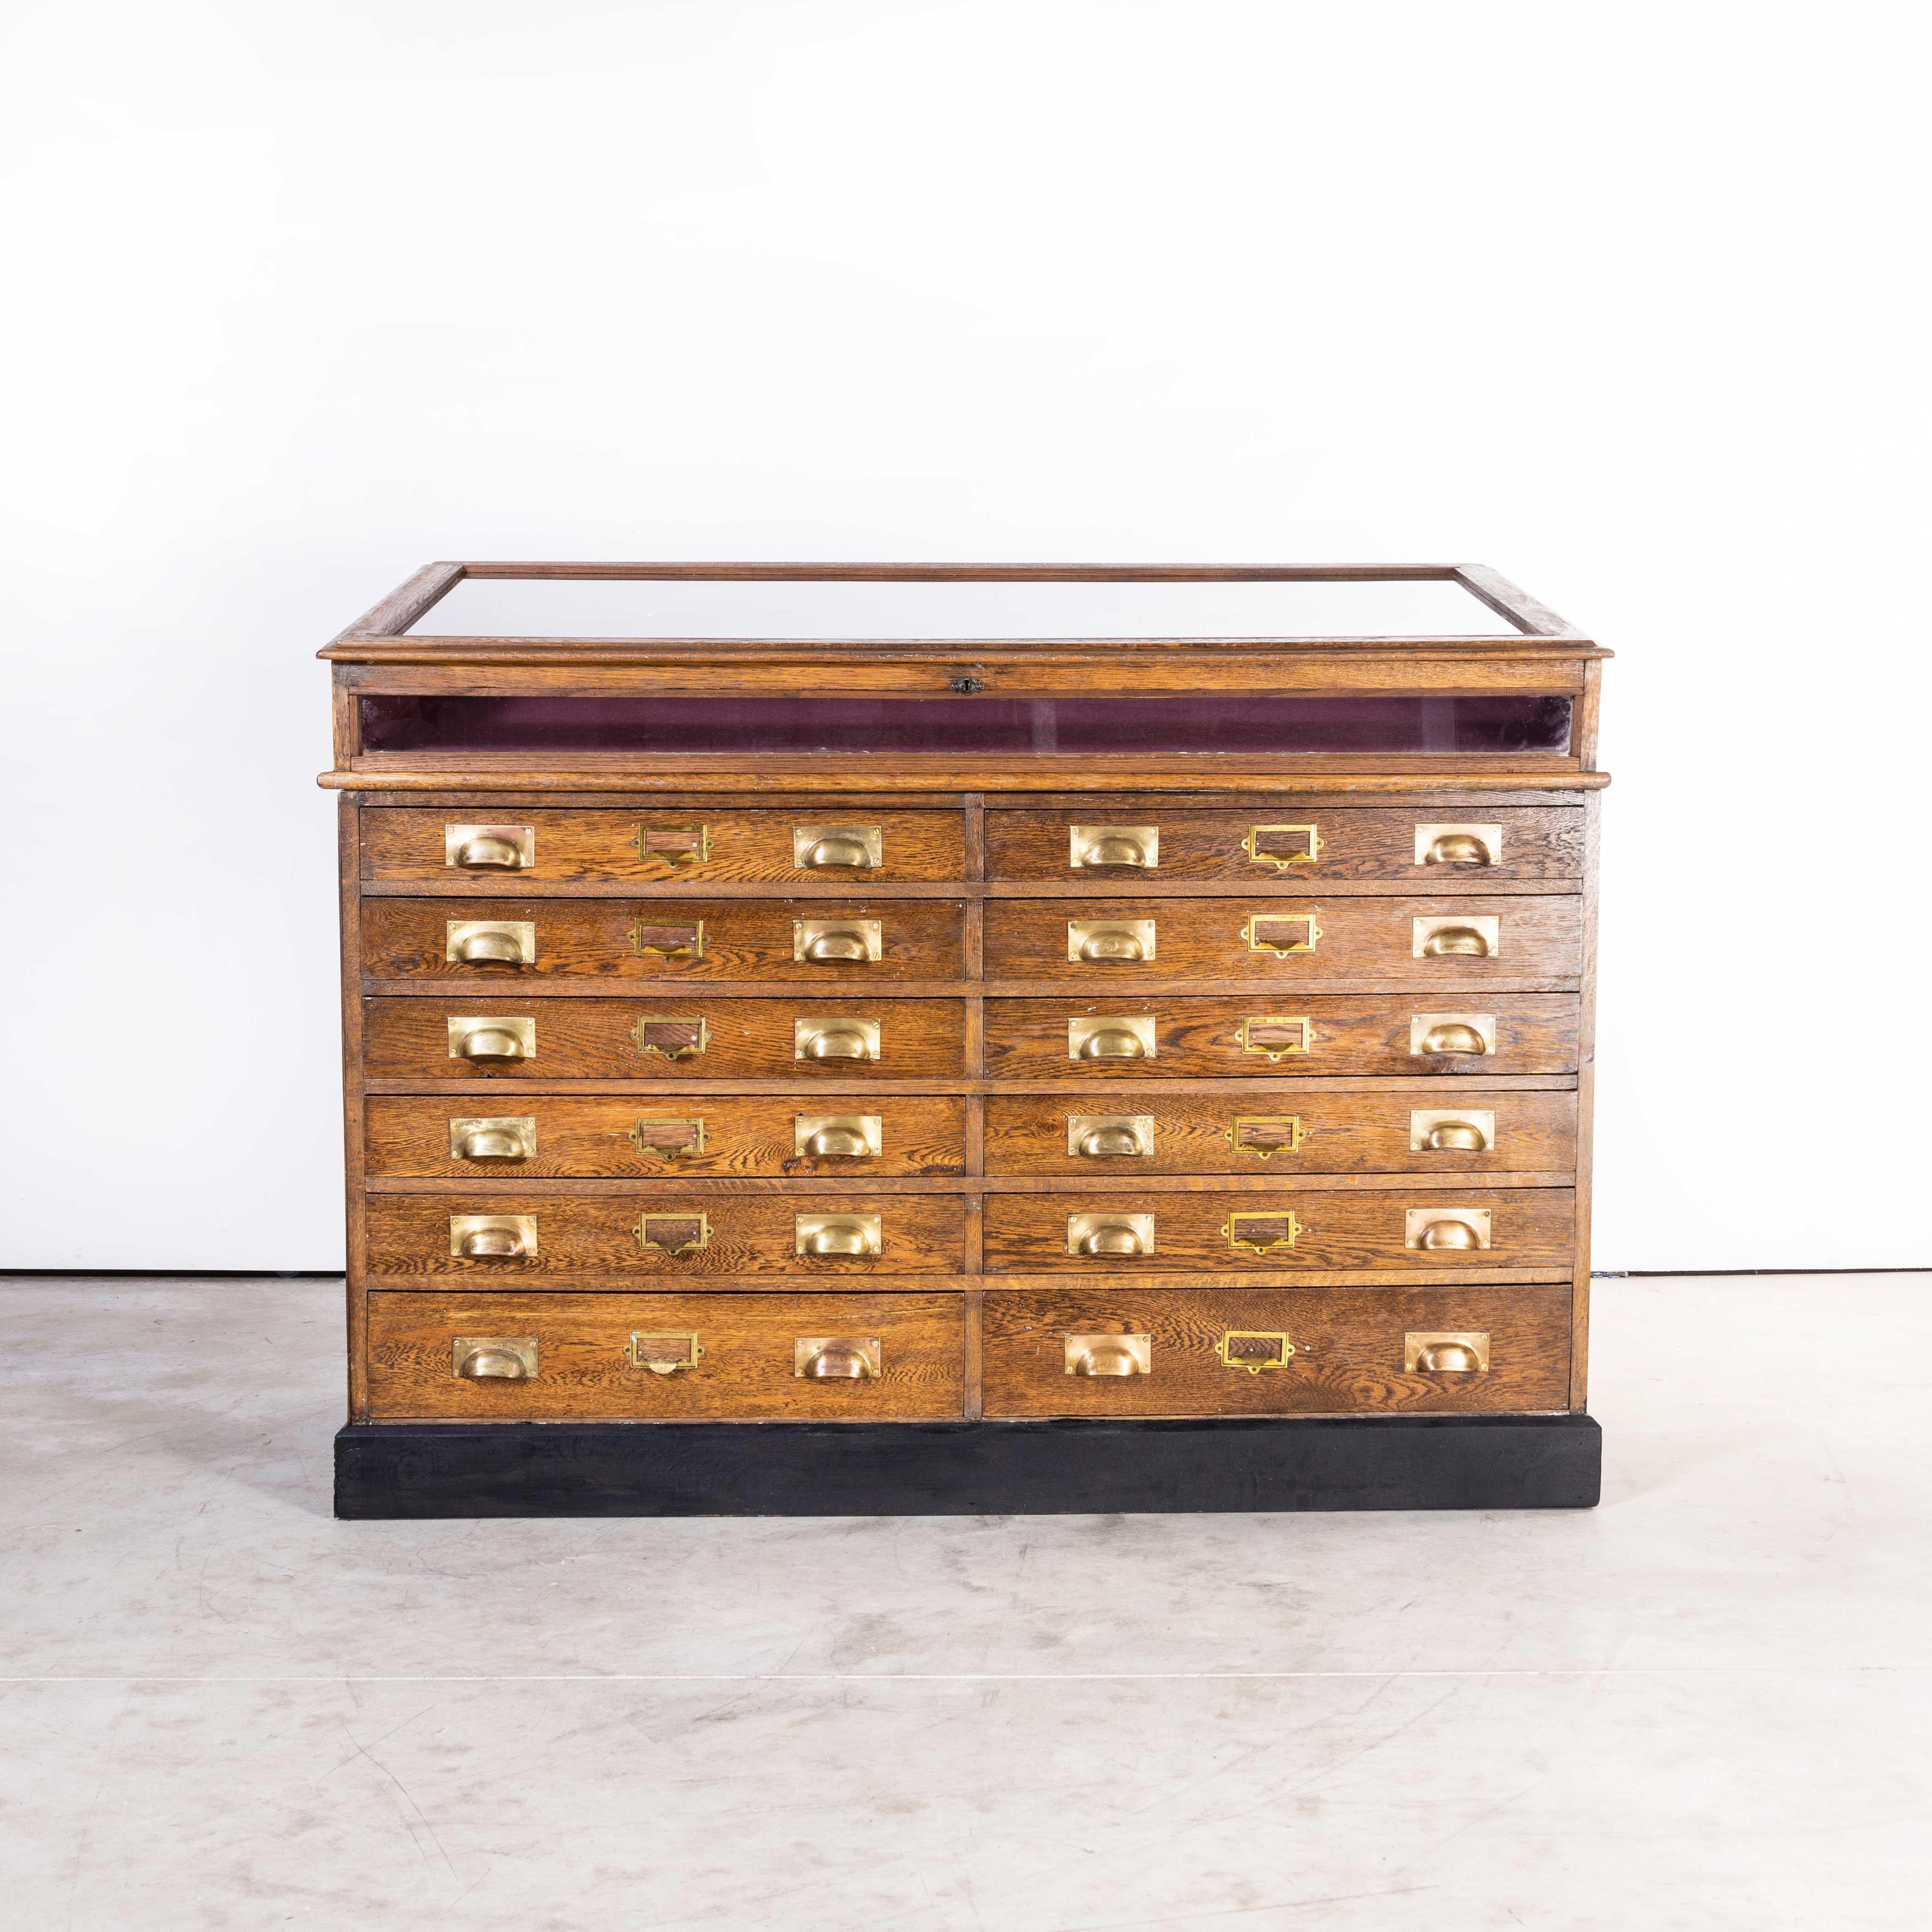 1940's High Quality English Oak Museum Display Cabinet, 12 Drawers, '2152.1' 1